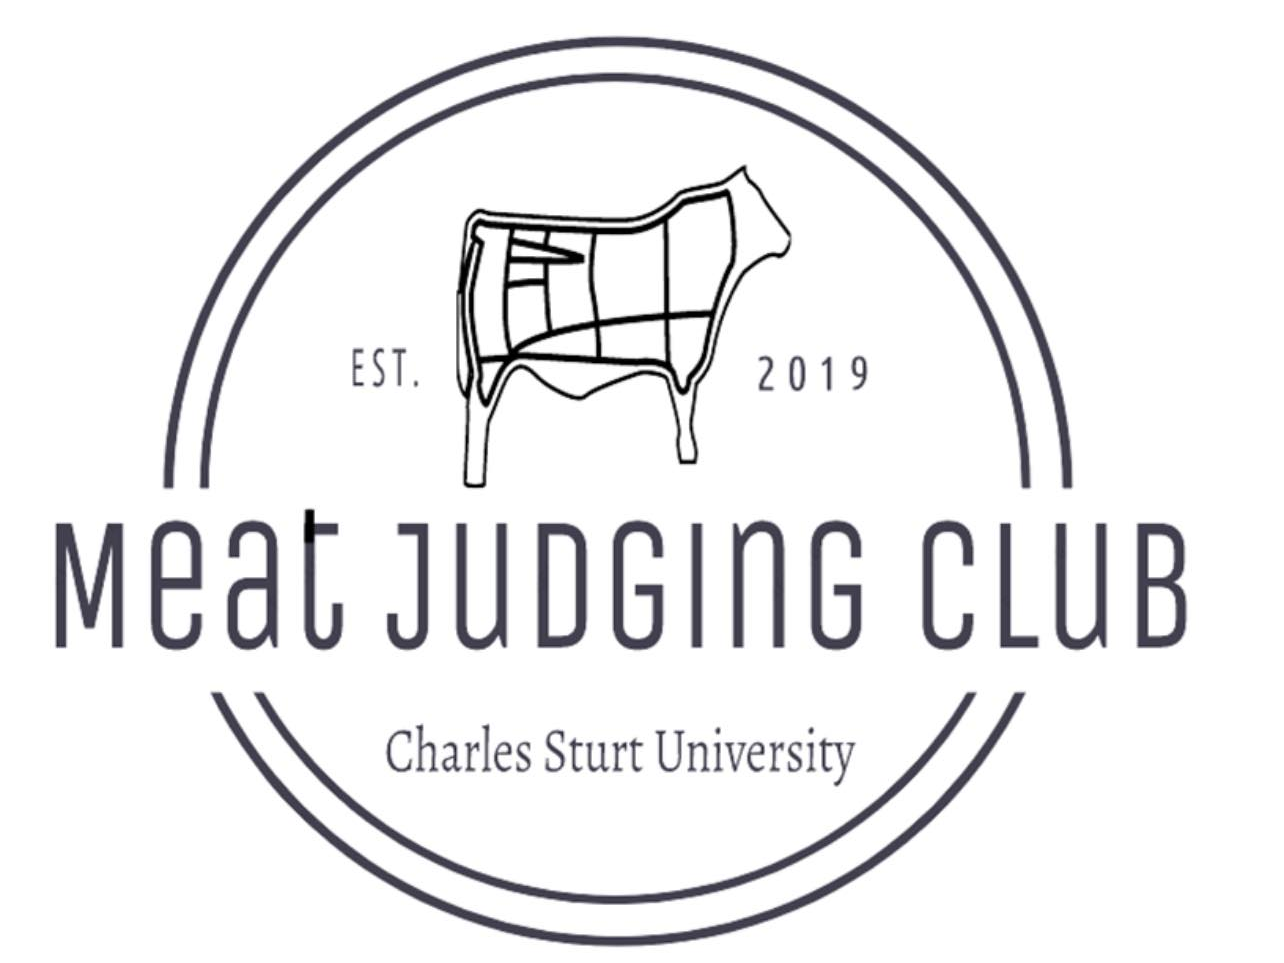 The Charles Sturt University Meat Judging Club Logo. [Photo taken from the Charles Sturt MJC Facebook Page.]